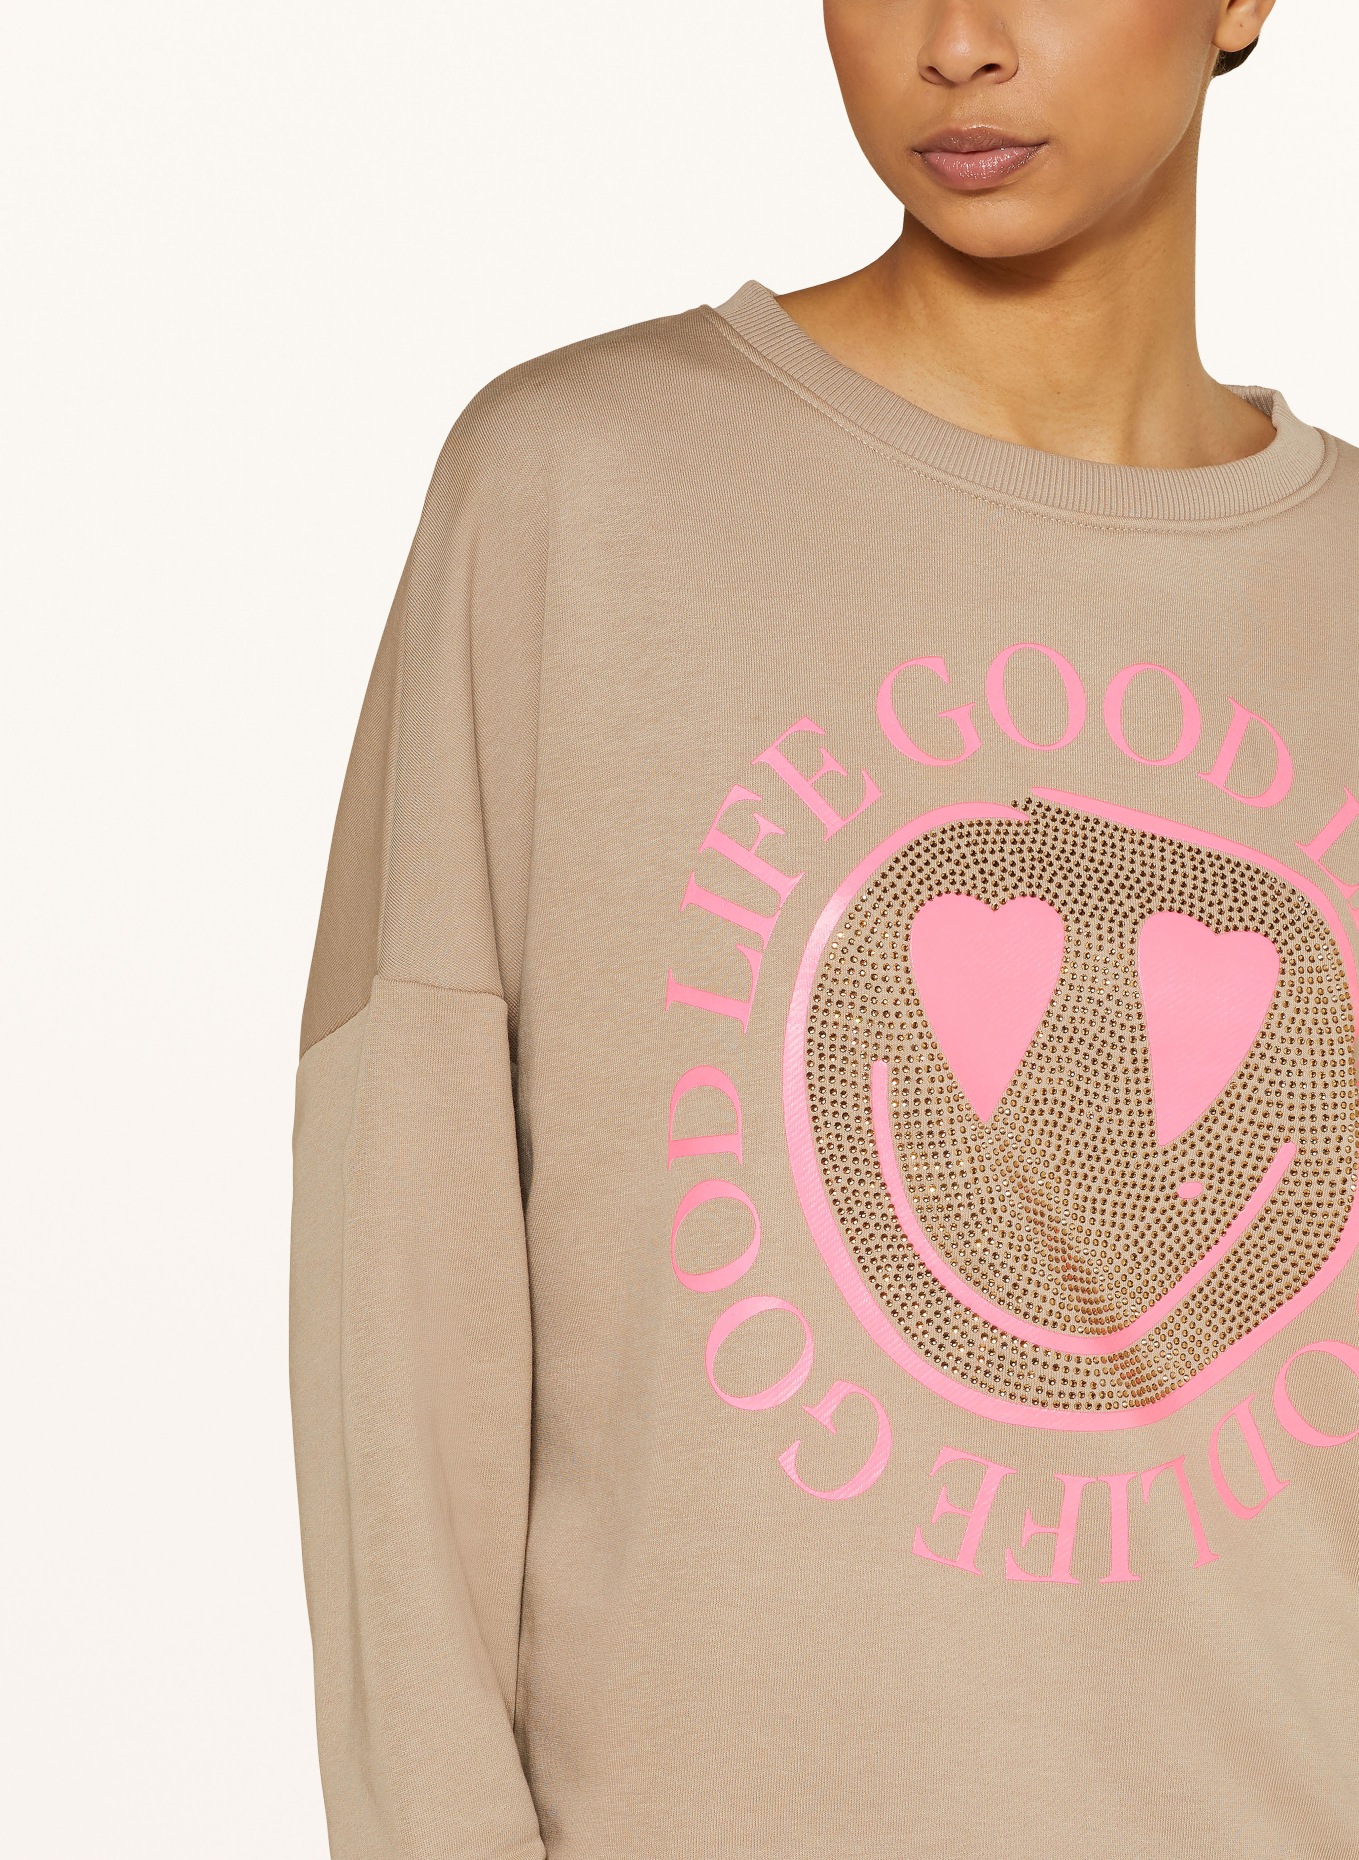 miss goodlife Sweatshirt with decorative gems, Color: LIGHT BROWN (Image 4)